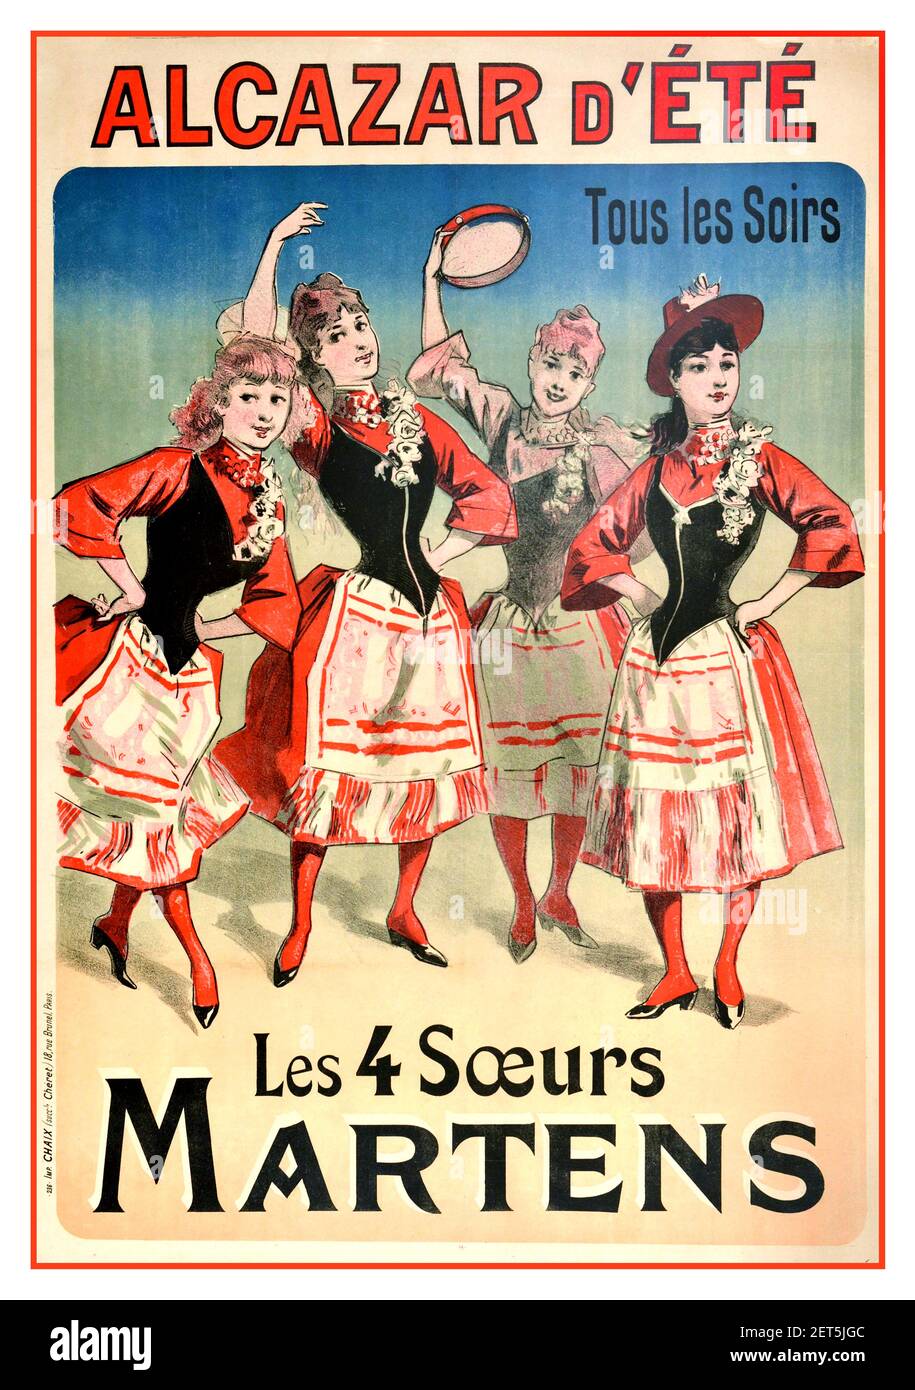 Vintage entertainment poster for Summer Alcazar - The 4 Martens Sisters / Alcazar D'ete - Les 4 Soeurs Martens - artwork by Jules Cheret (1836 - 1932) features four ladies in red, back and white dresses striking dance poses on a blue background. One of the sisters is holding up a tambourine and smiling. Printed in Paris. Country of issue: France, designer: Jules Cheret, year of printing: 1888 Stock Photo